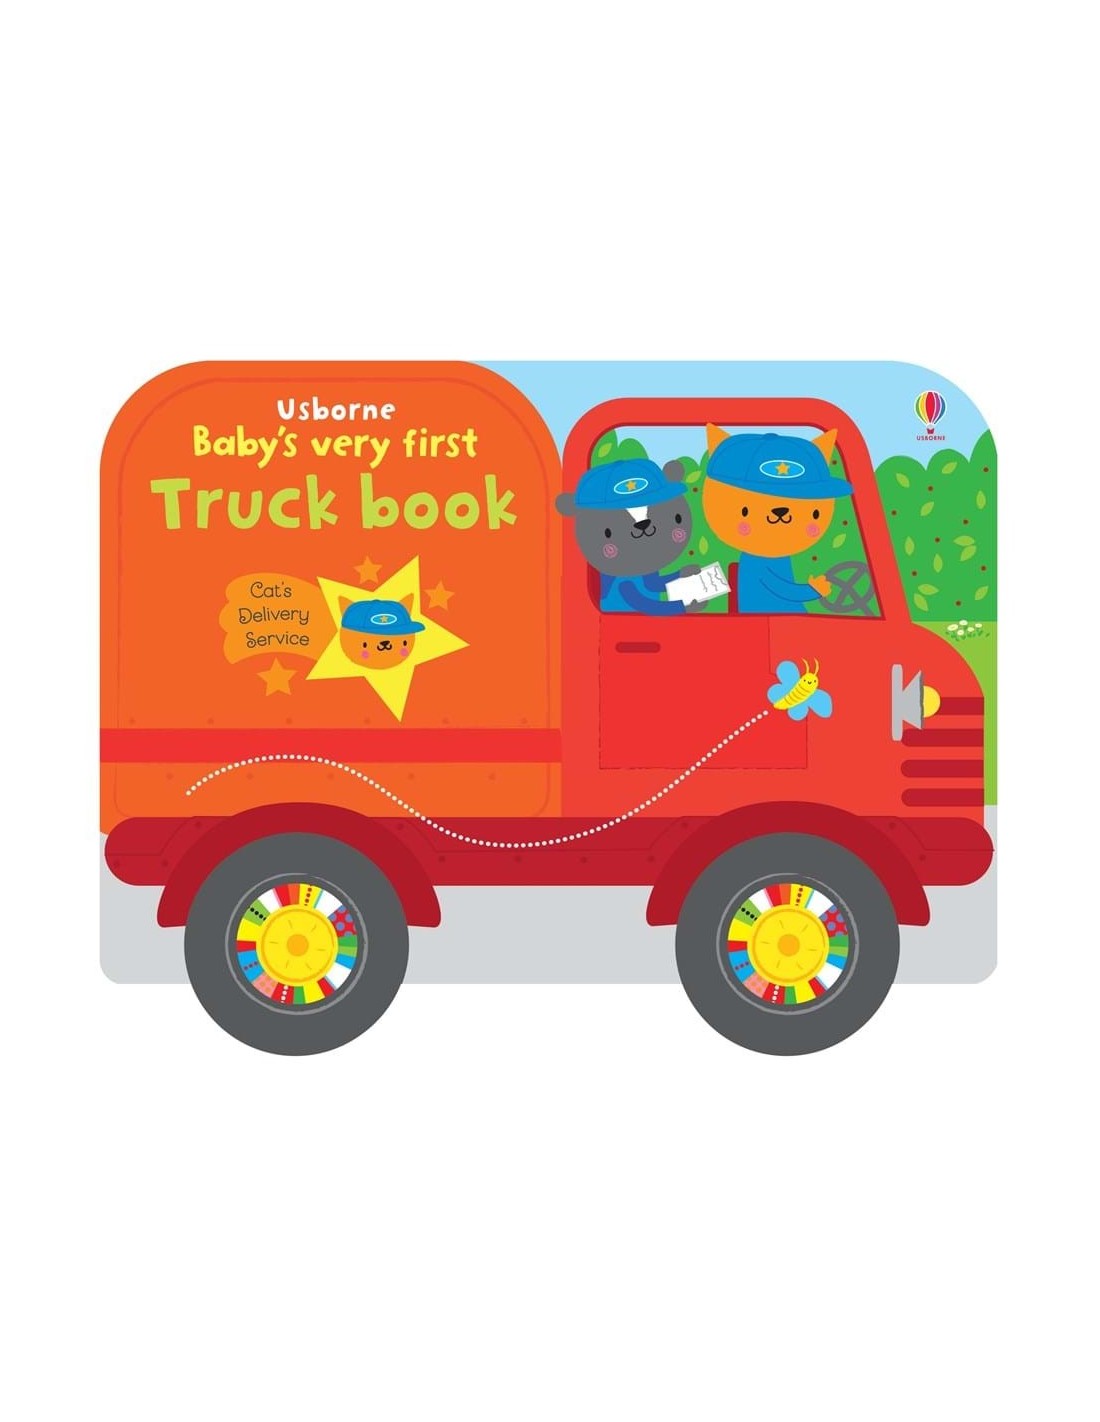 Baby's very first truck book